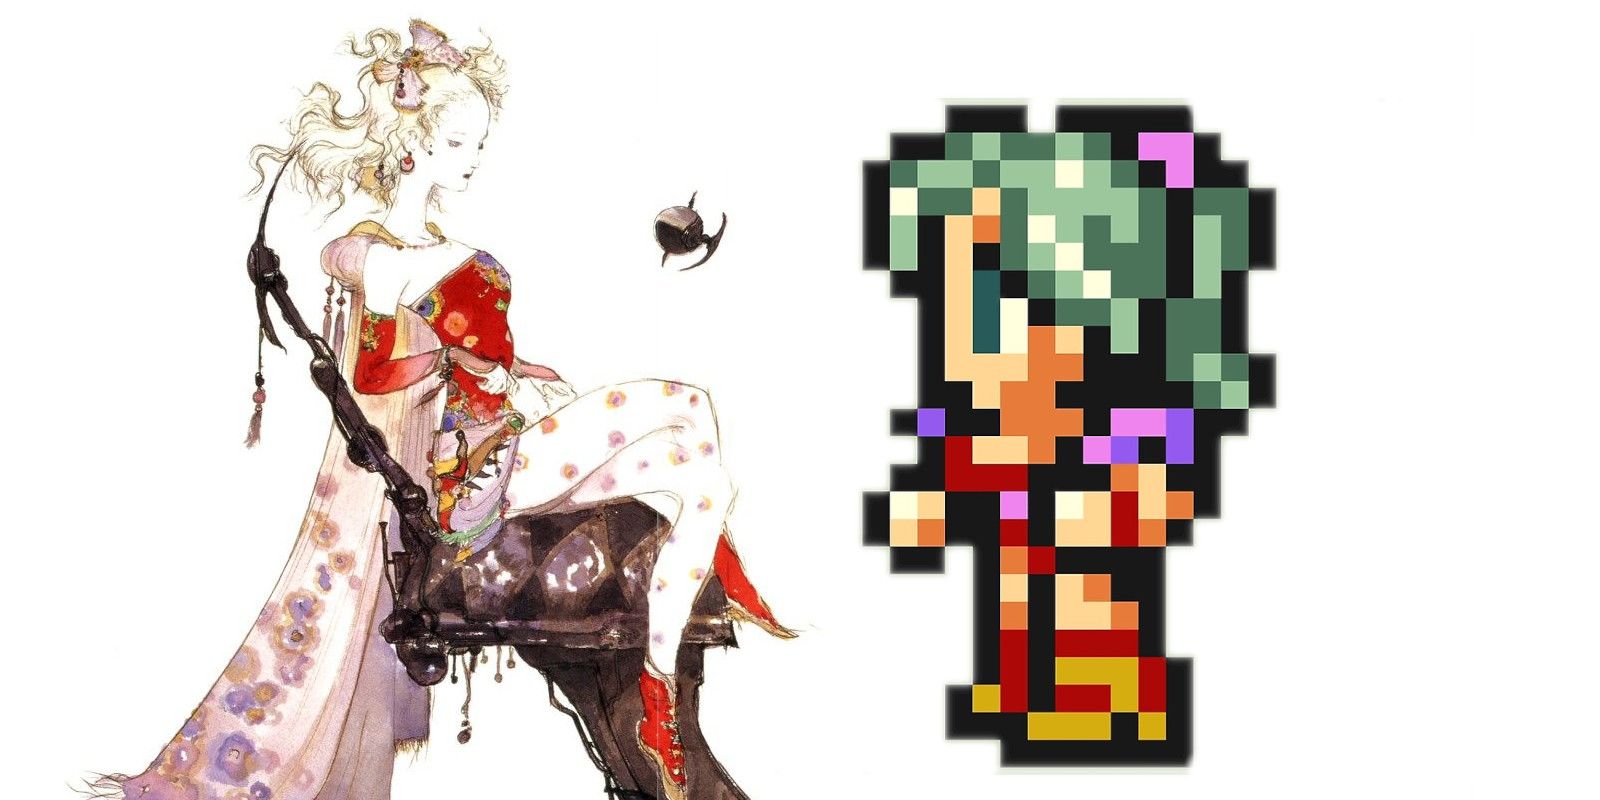 Terra in Final Fantasy 6 drawn by Yoshitaka Amano and her sprite in the game